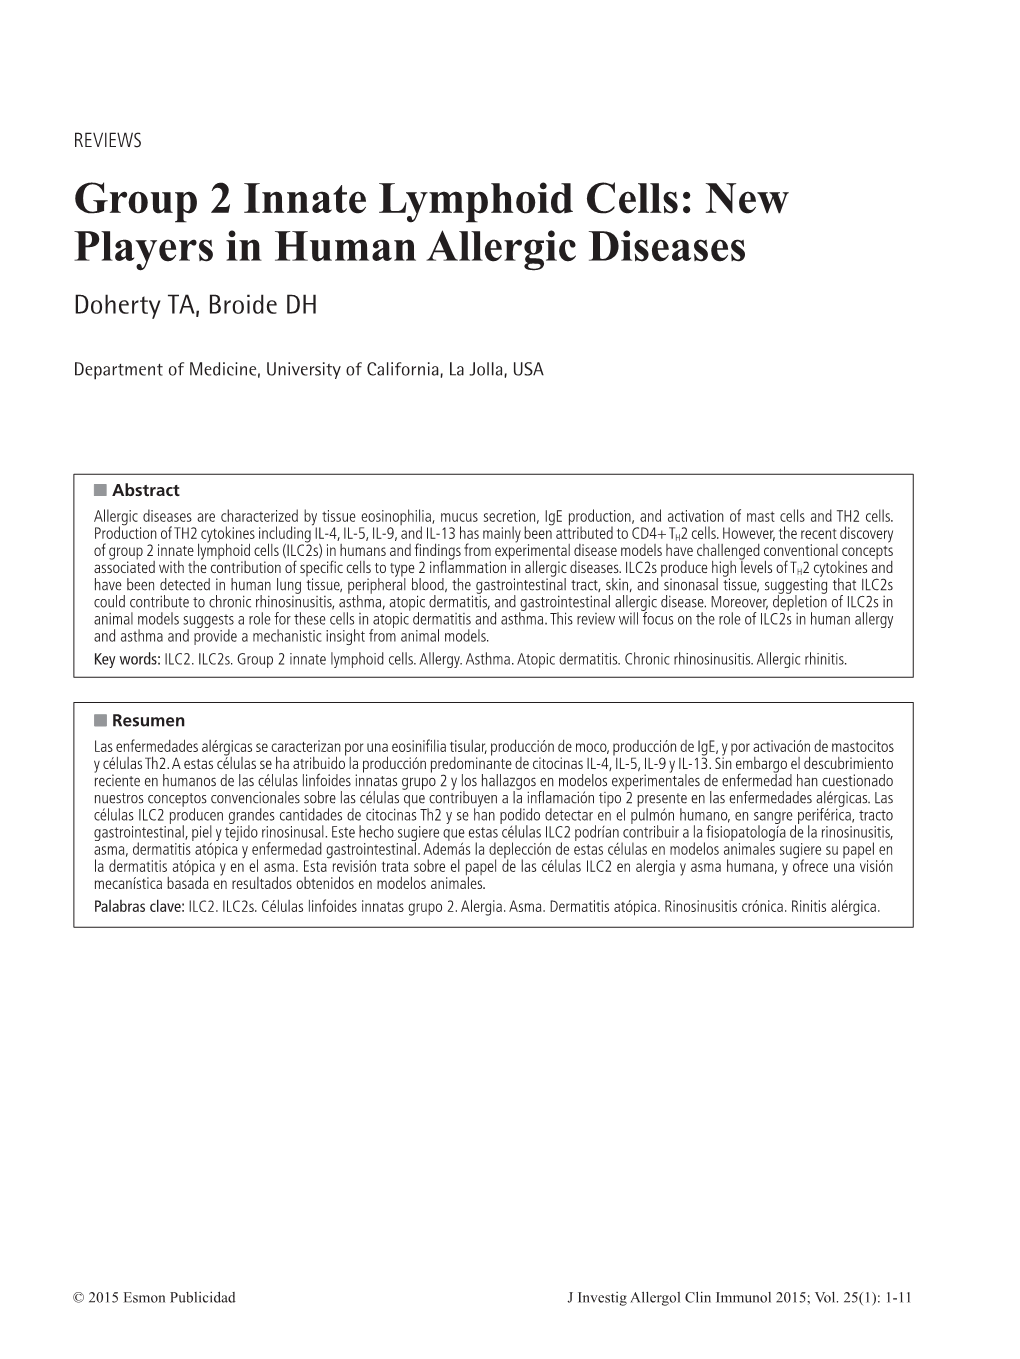 Group 2 Innate Lymphoid Cells: New Players in Human Allergic Diseases Doherty TA, Broide DH